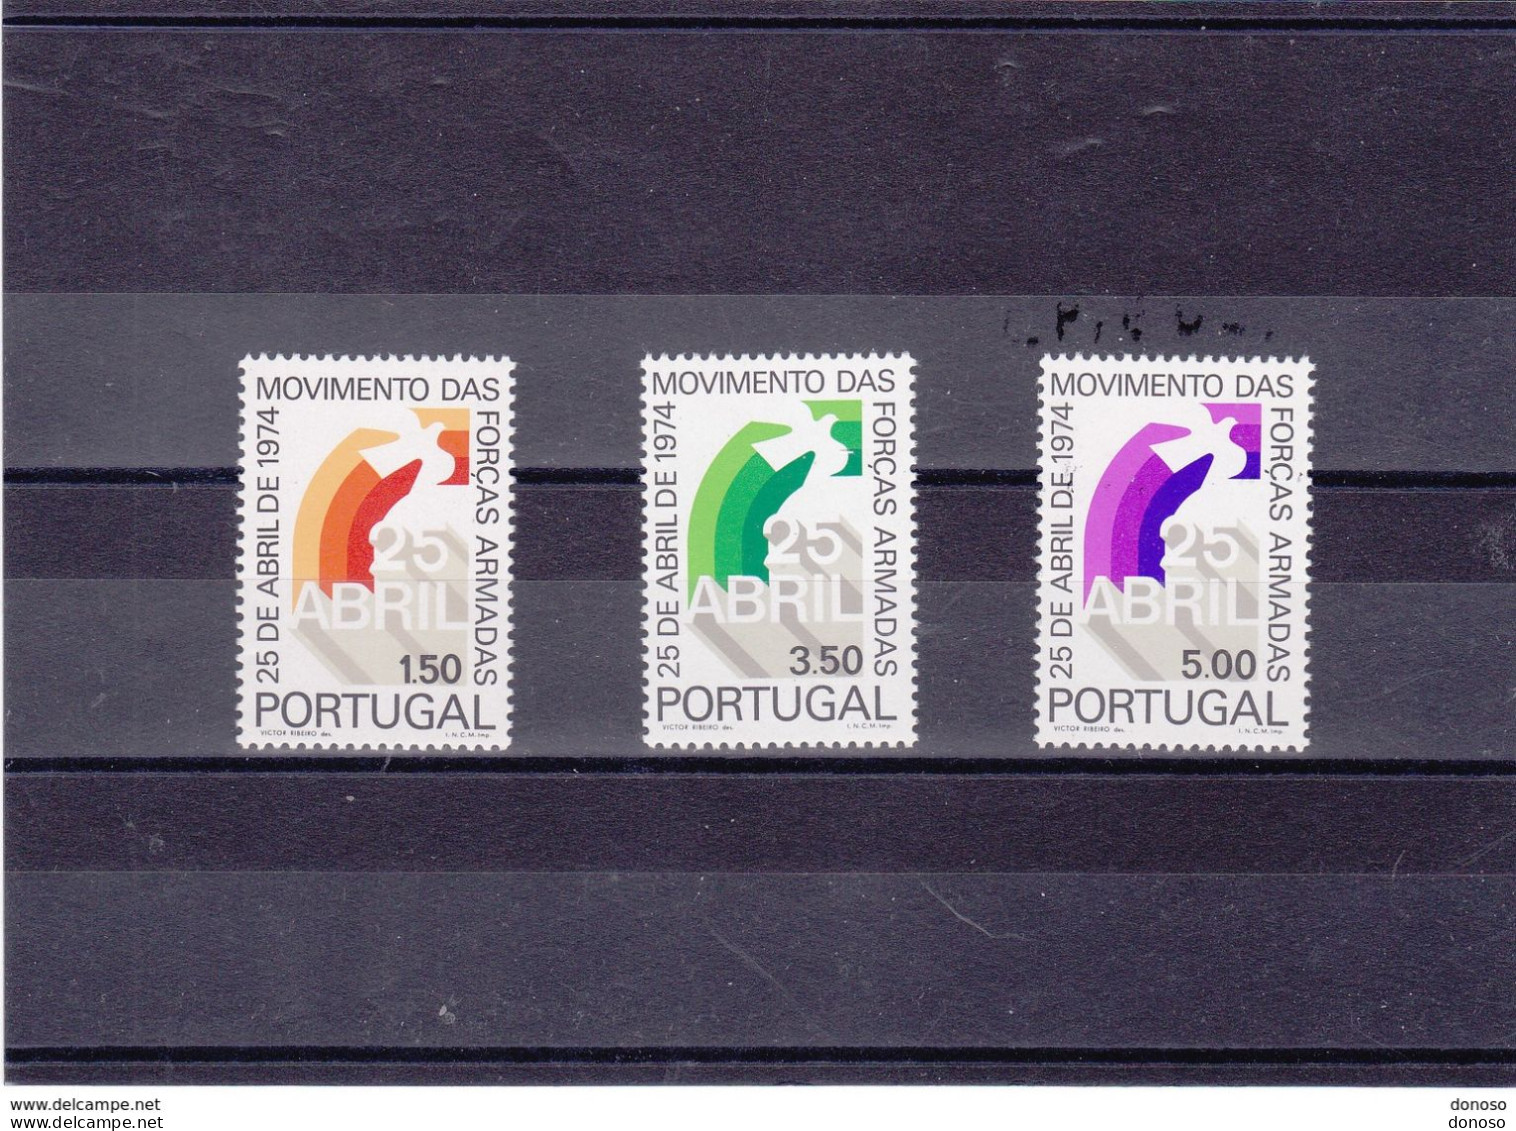 PORTUGAL 1974 MOUVEMENT DU 25 AVRIL Yvert 1246-1248, Michel 1266-1268 NEUF** MNH Cote 7,50 Euros - Unused Stamps